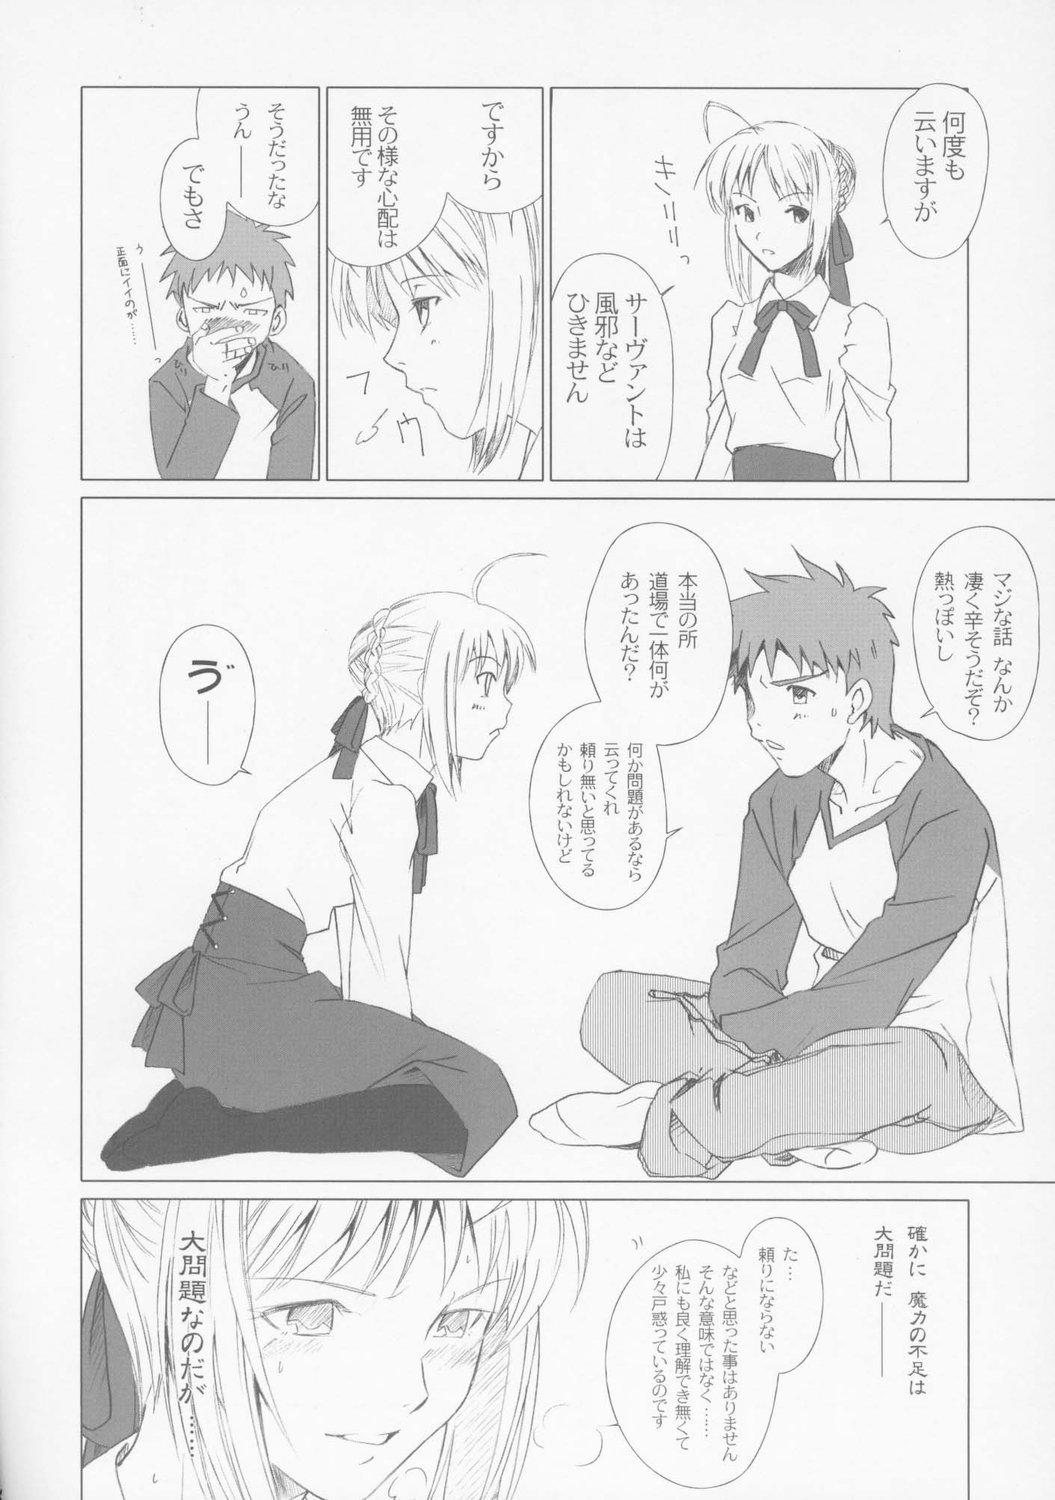 Pene Eien no Uta - Ever Song - Fate stay night Fate hollow ataraxia Rabo - Page 10